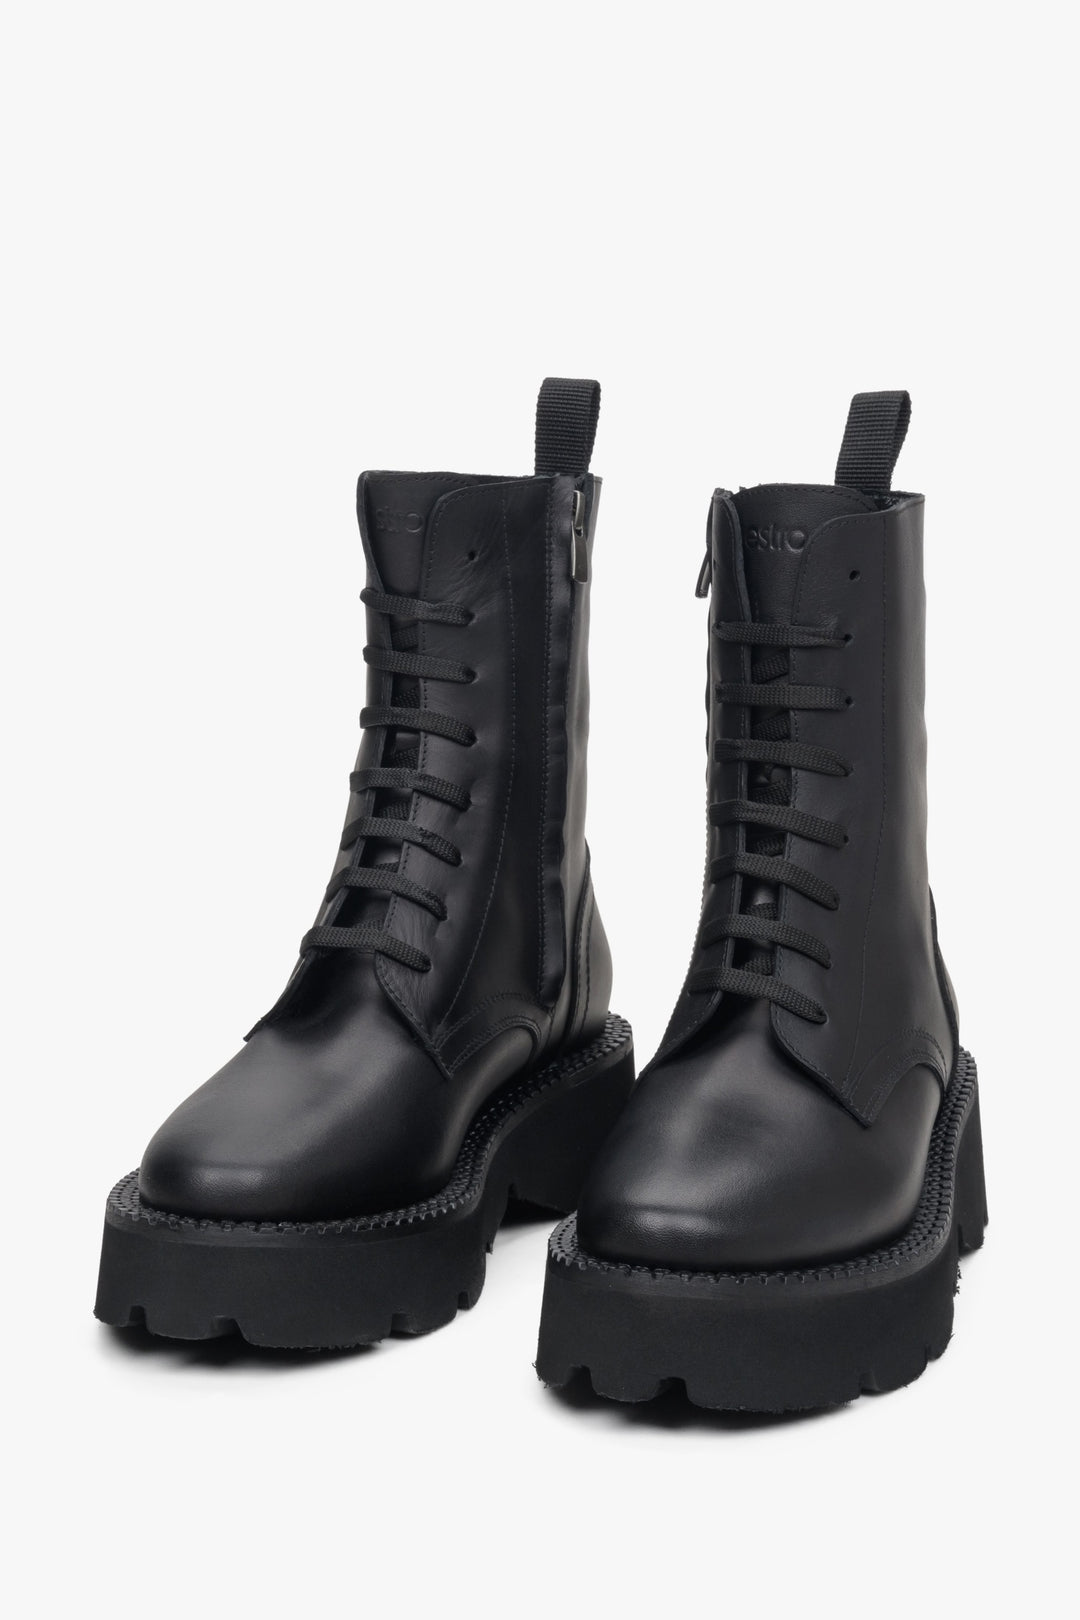 Women's Estro boots in black - front view presentation of the model.